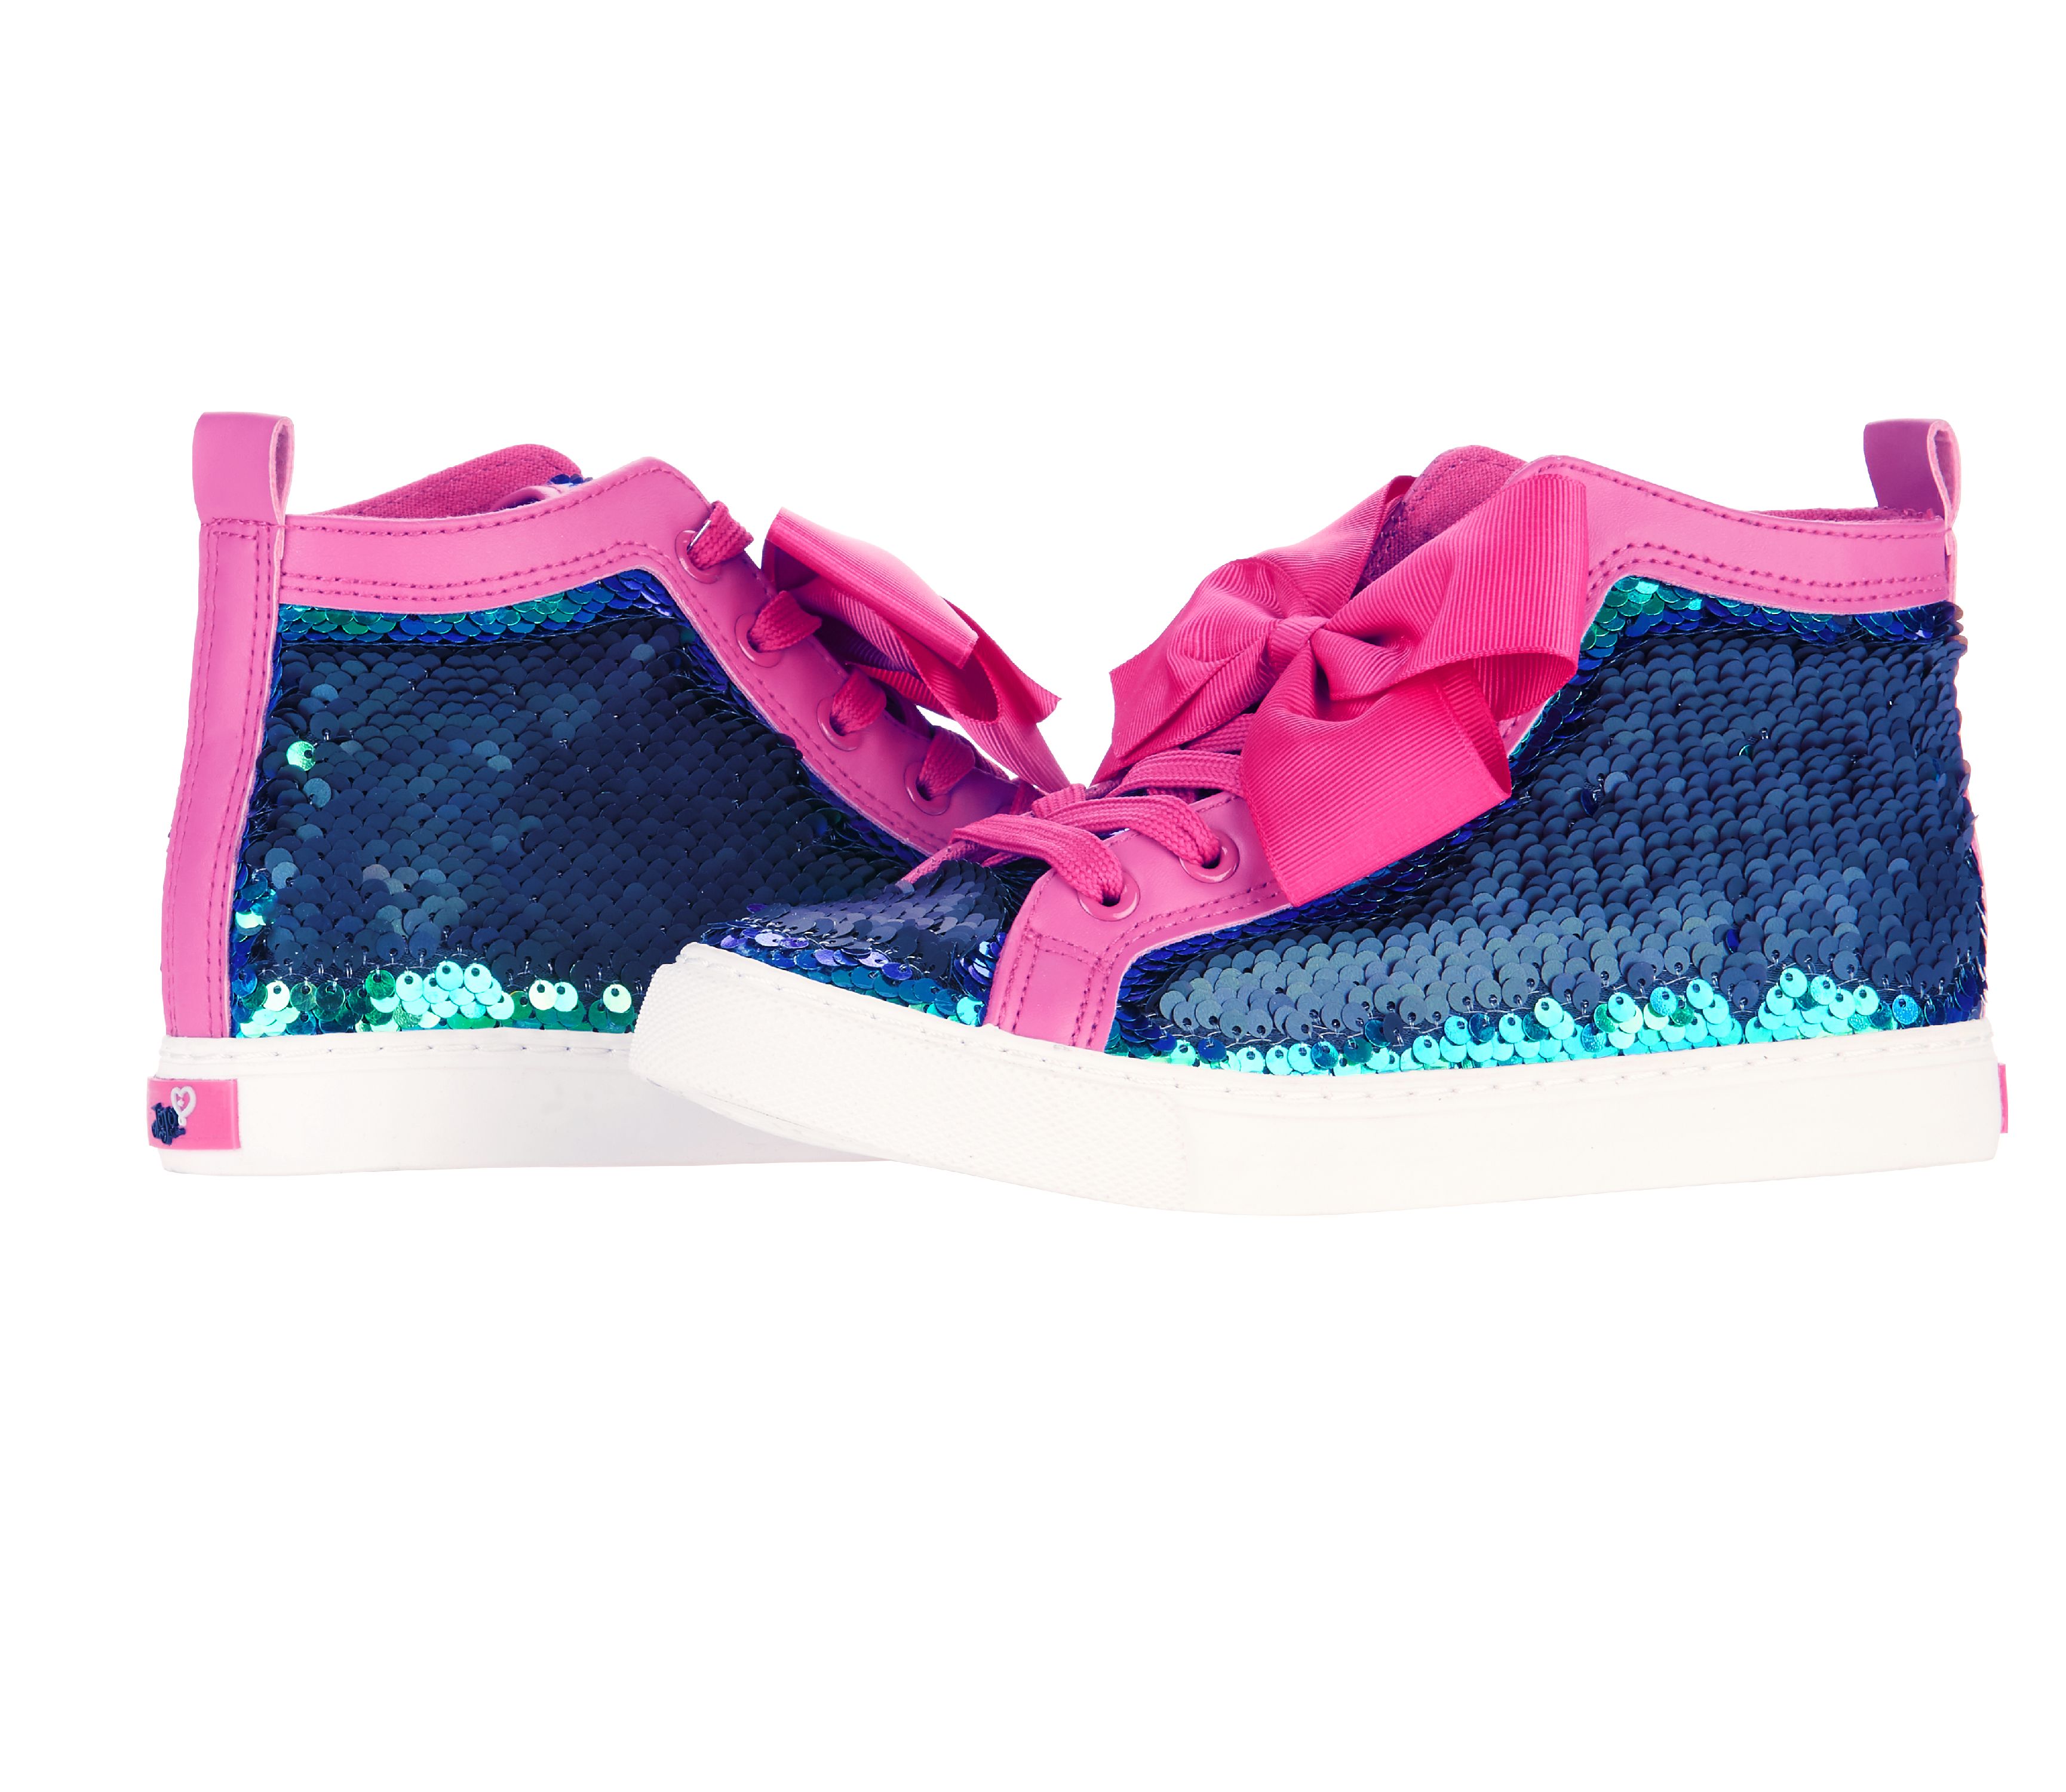 Jojo Siwa Girl's Sequin High Top Sneaker With Bow - image 6 of 8